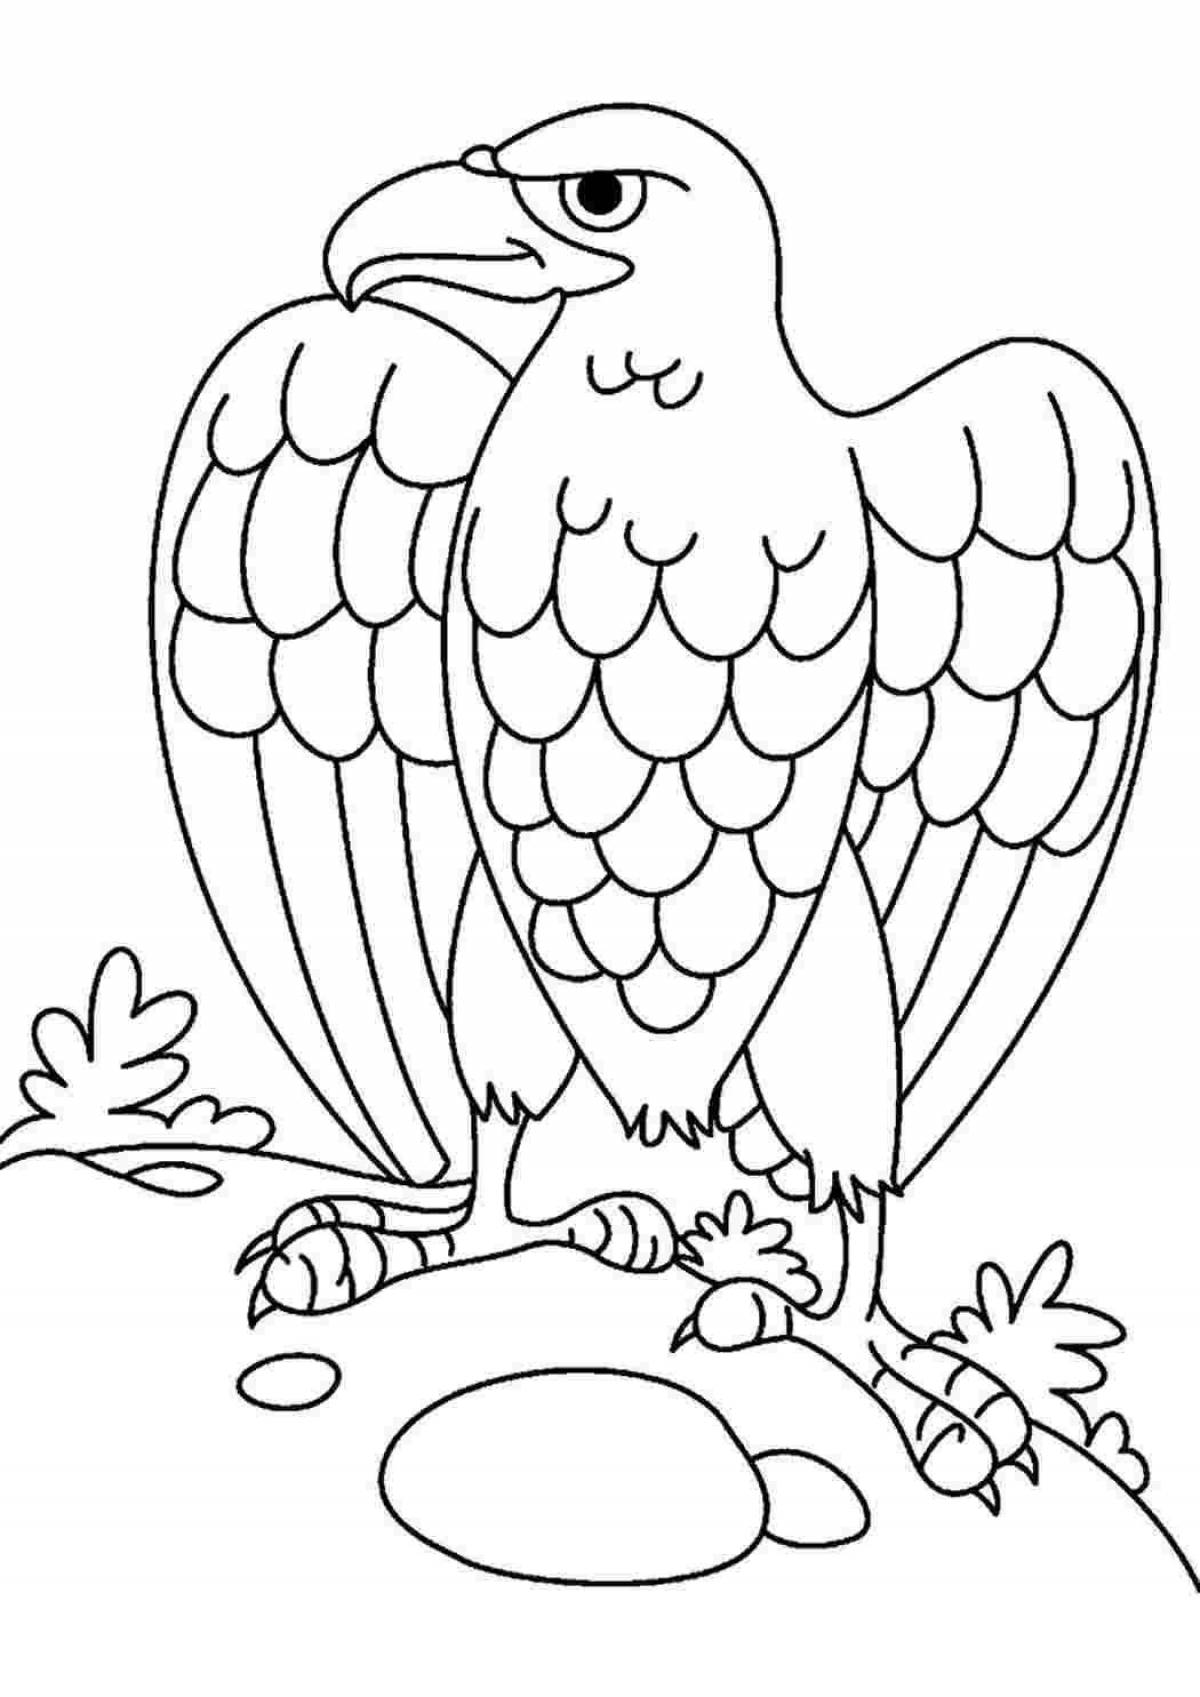 Coloring page graceful eagle